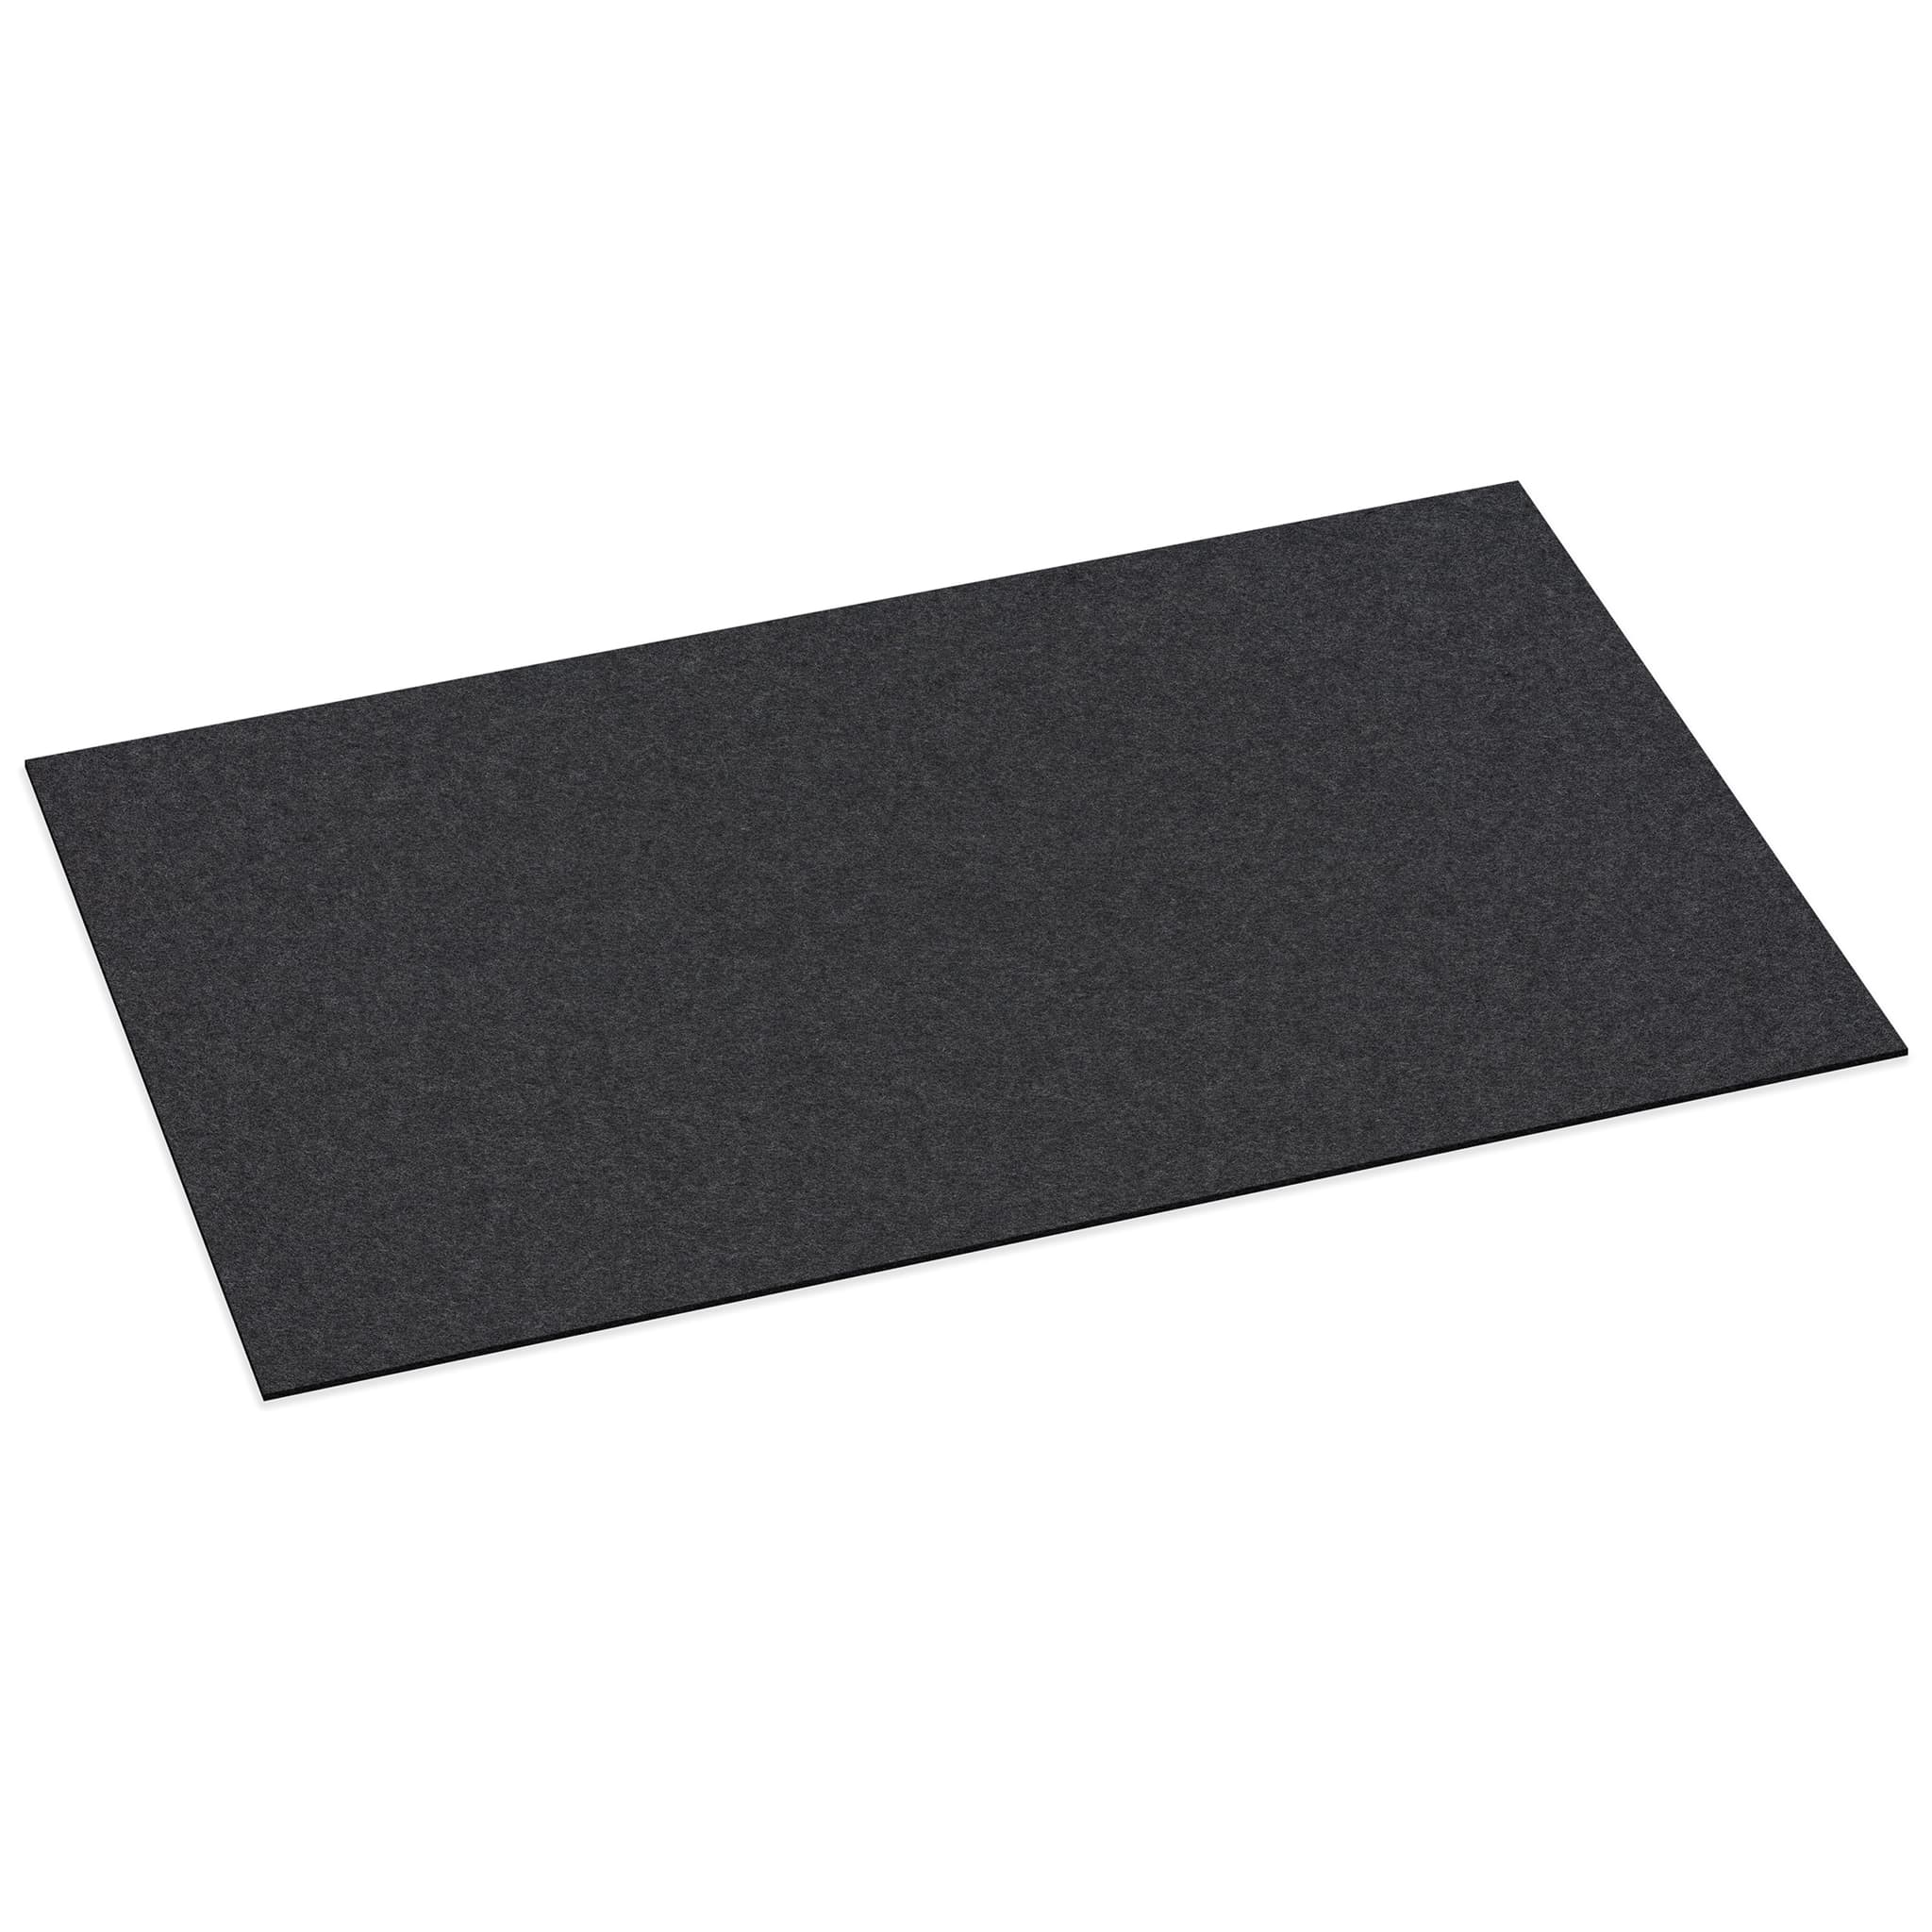 Rectangular Felt Desk Pad in Graphite by Hey-Sign 300109008 looking at Front-Angle